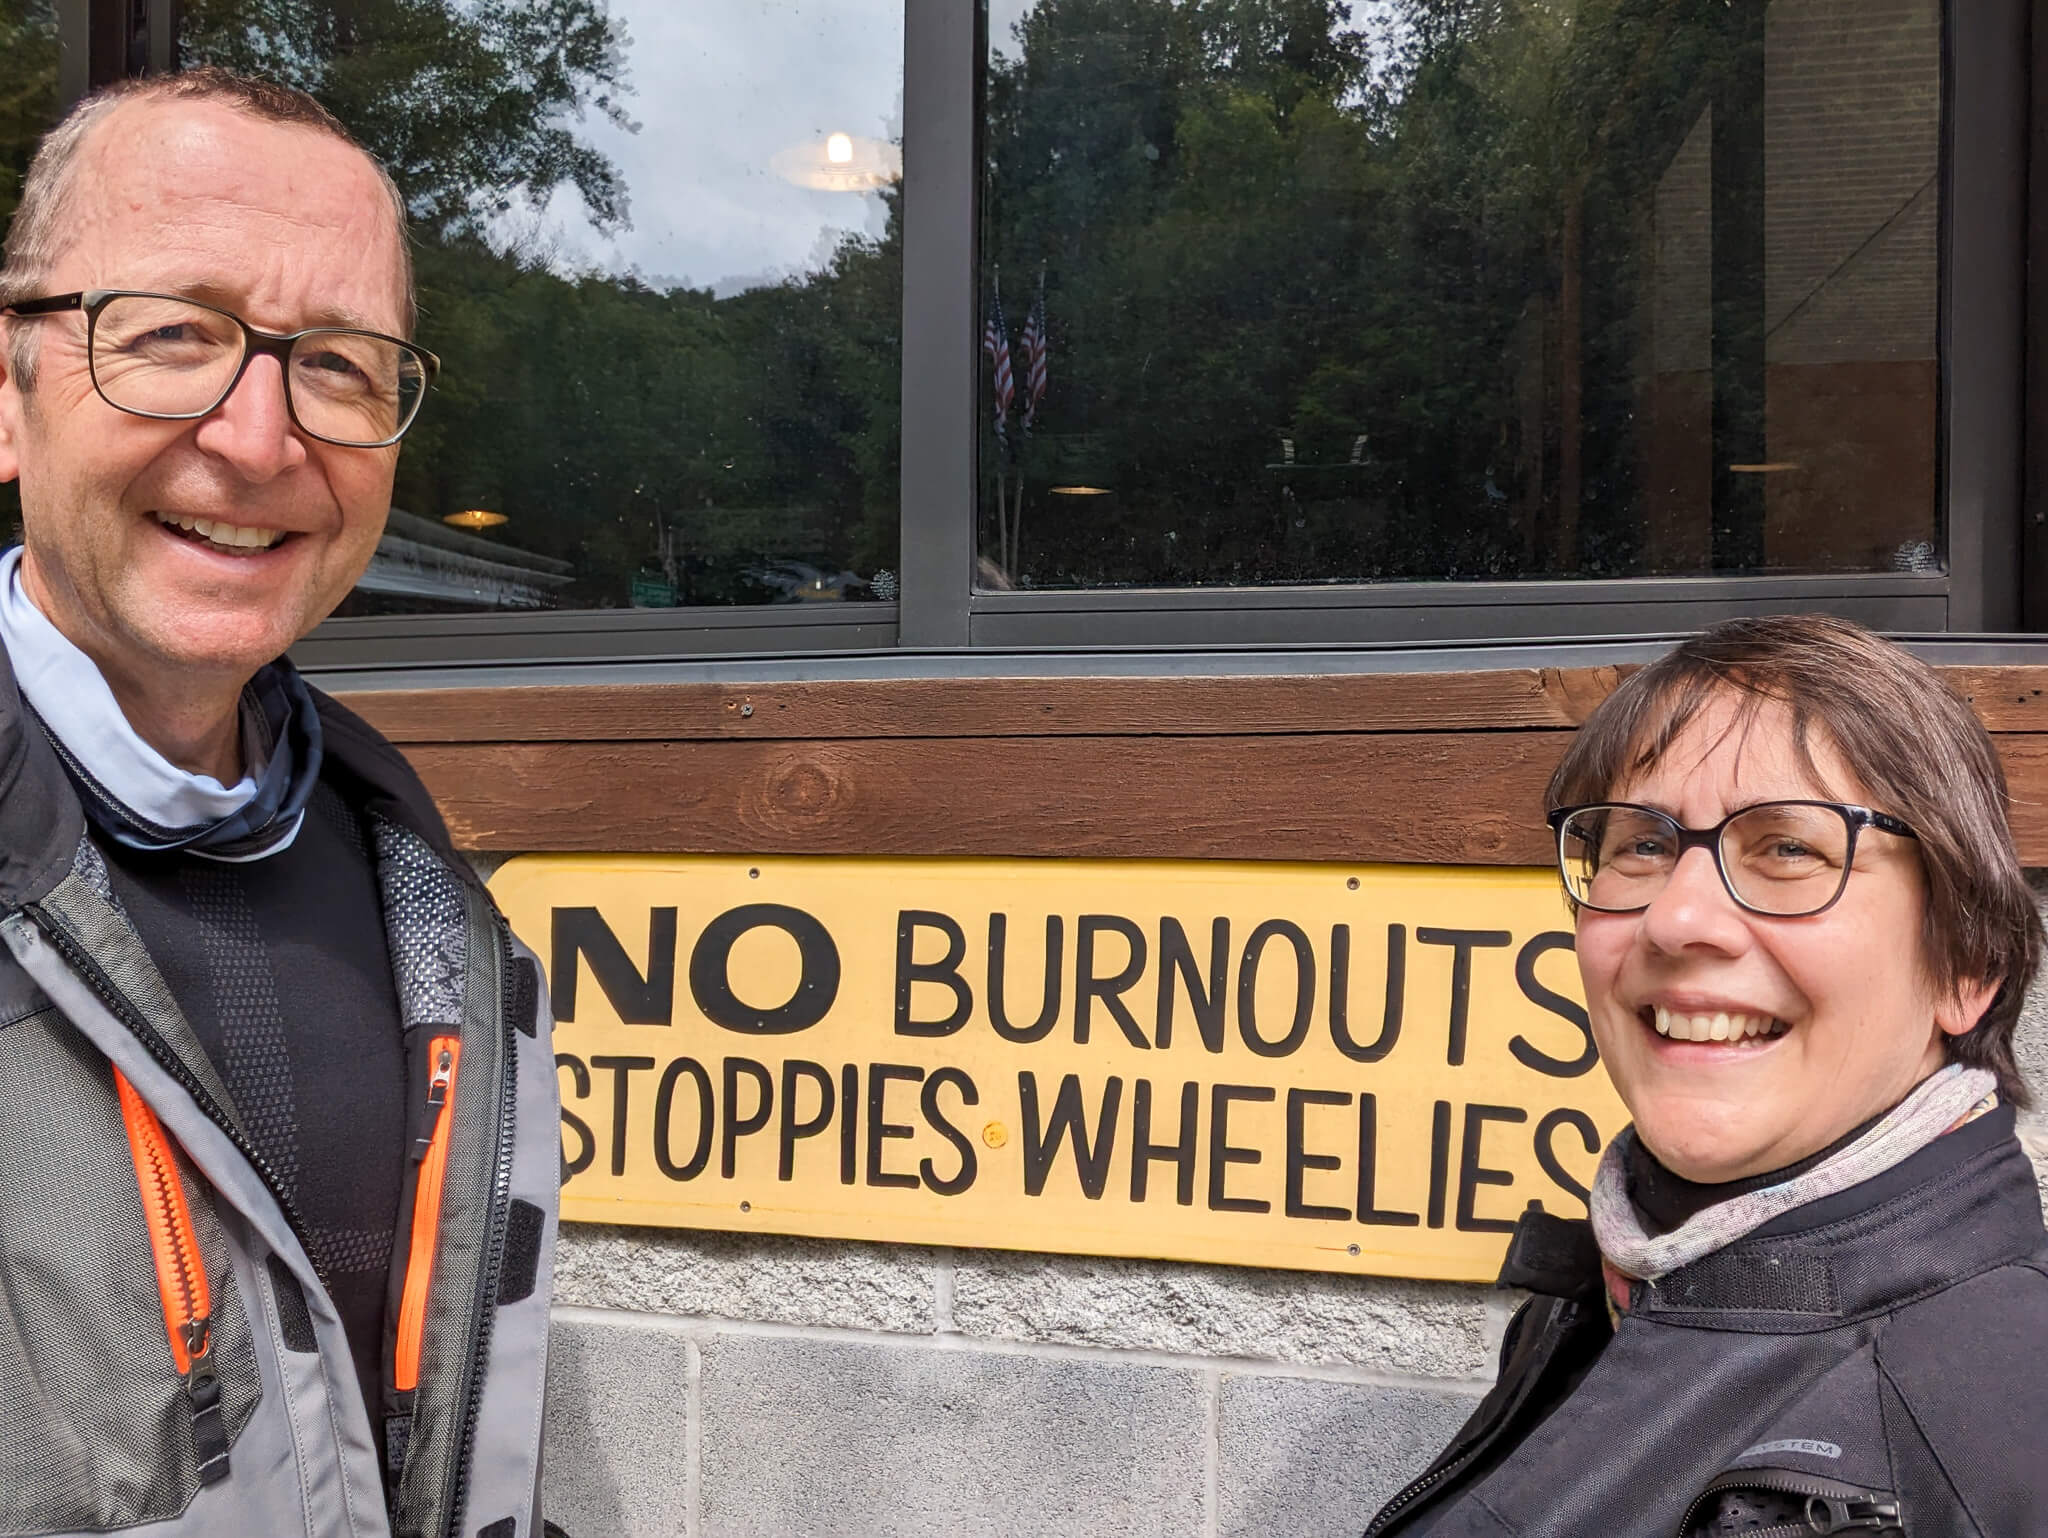 Two riders in front of sign reading “No burnouts, stoppies, wheelies”